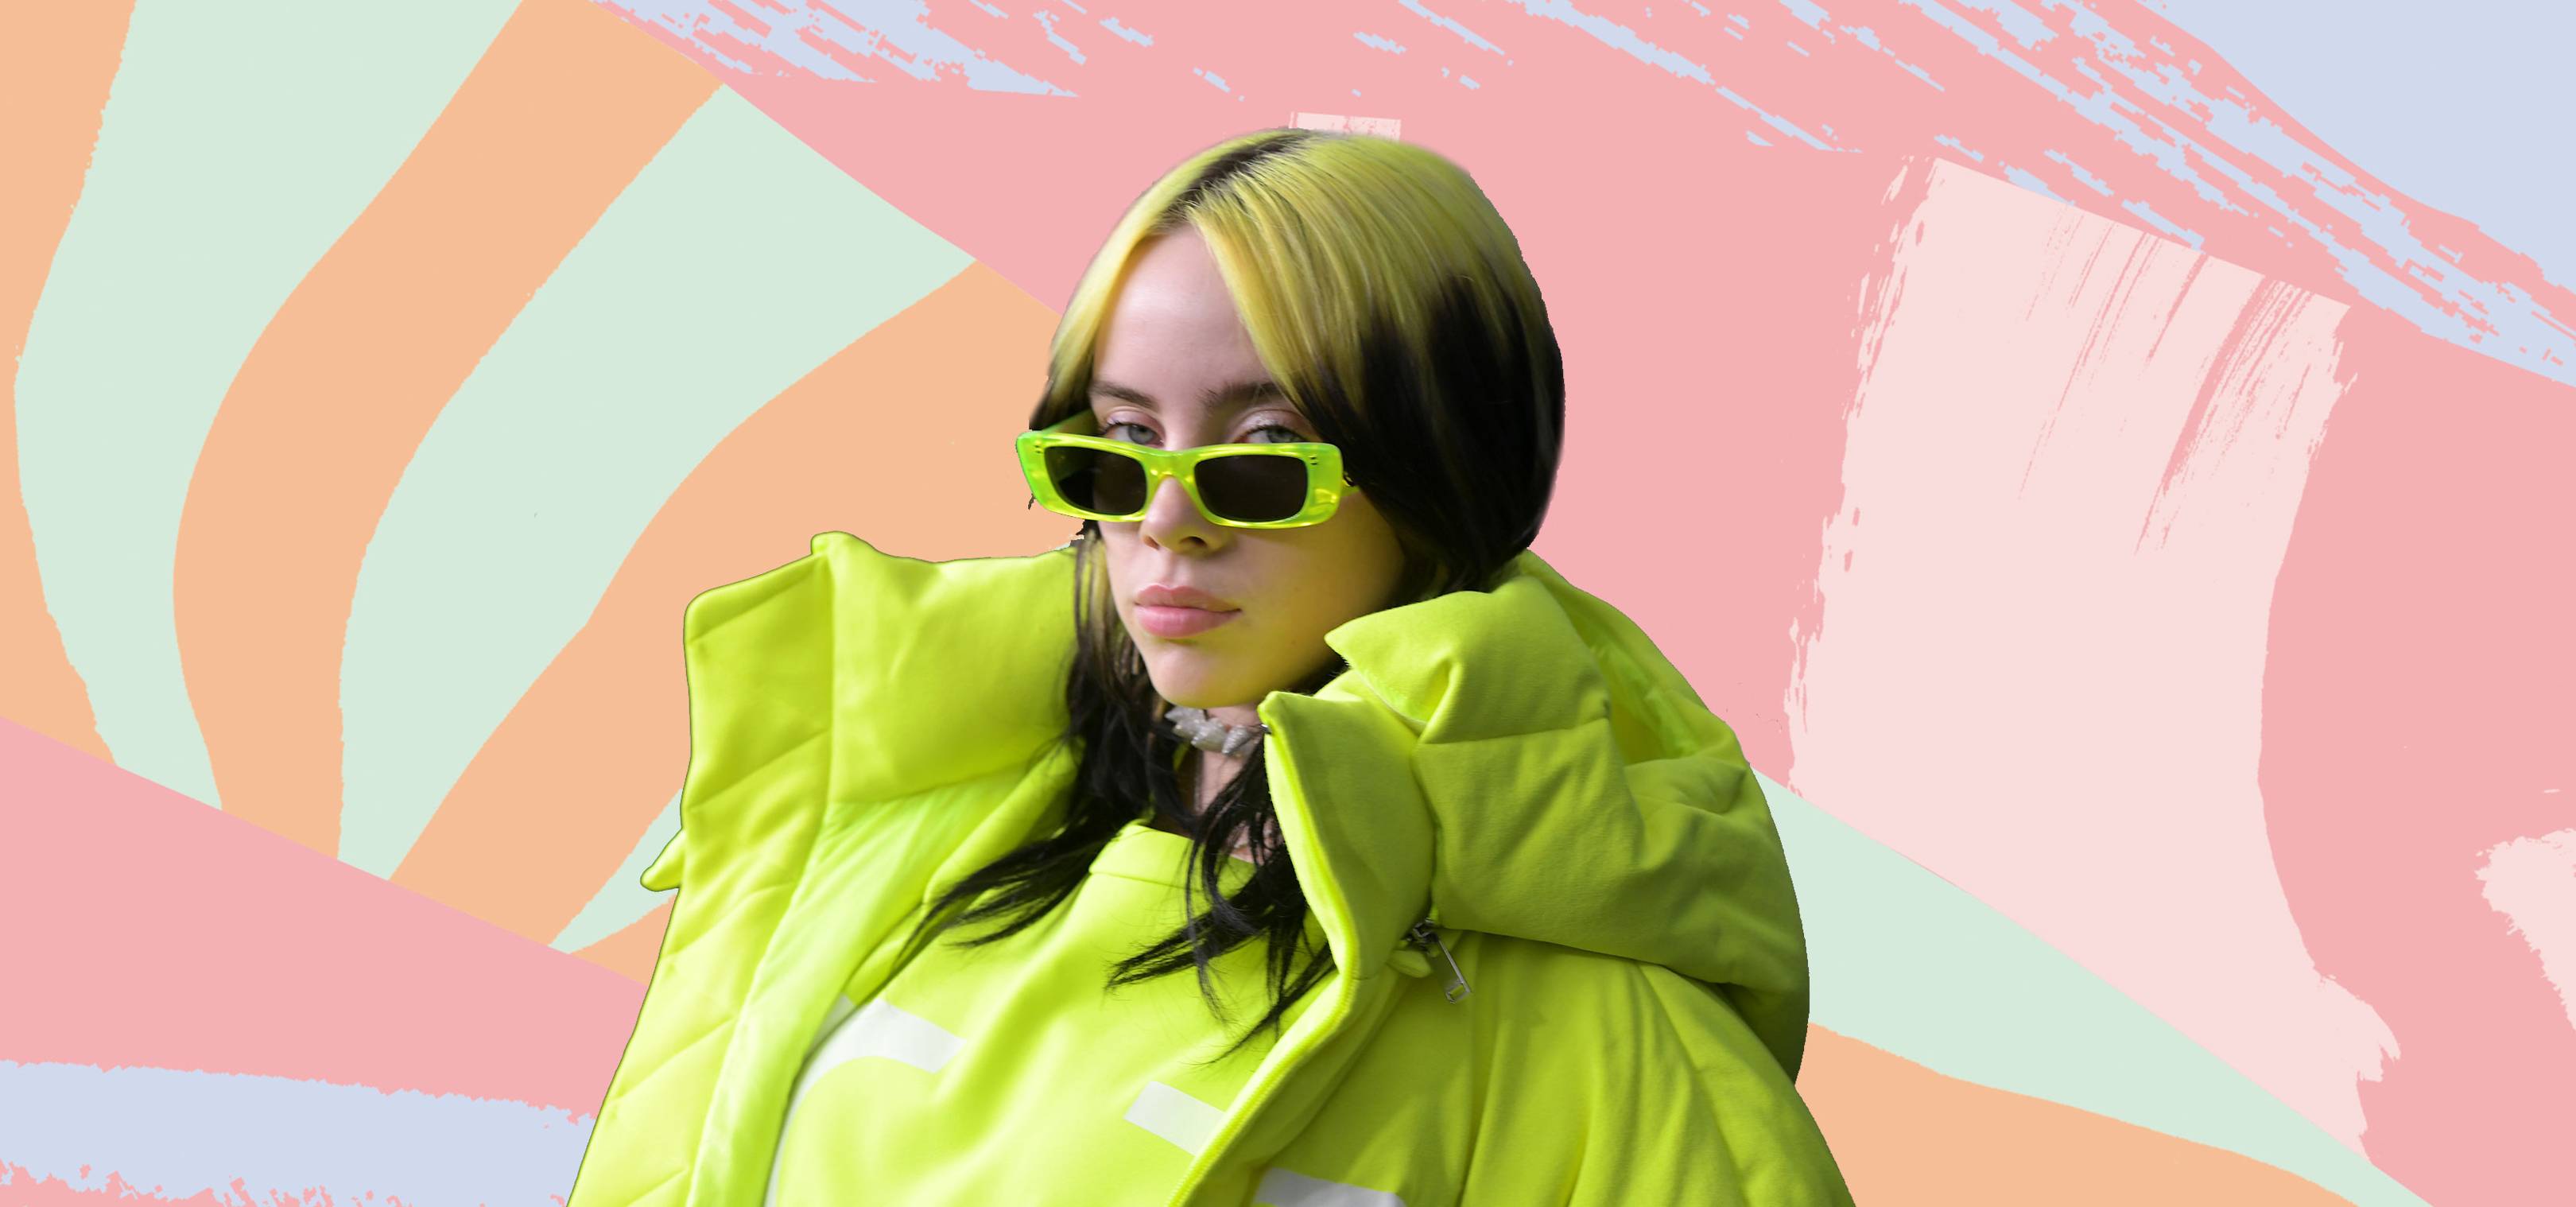 Billie Eilish's shoes are 2020's version of 'The Dress' and the internet is losing its mind